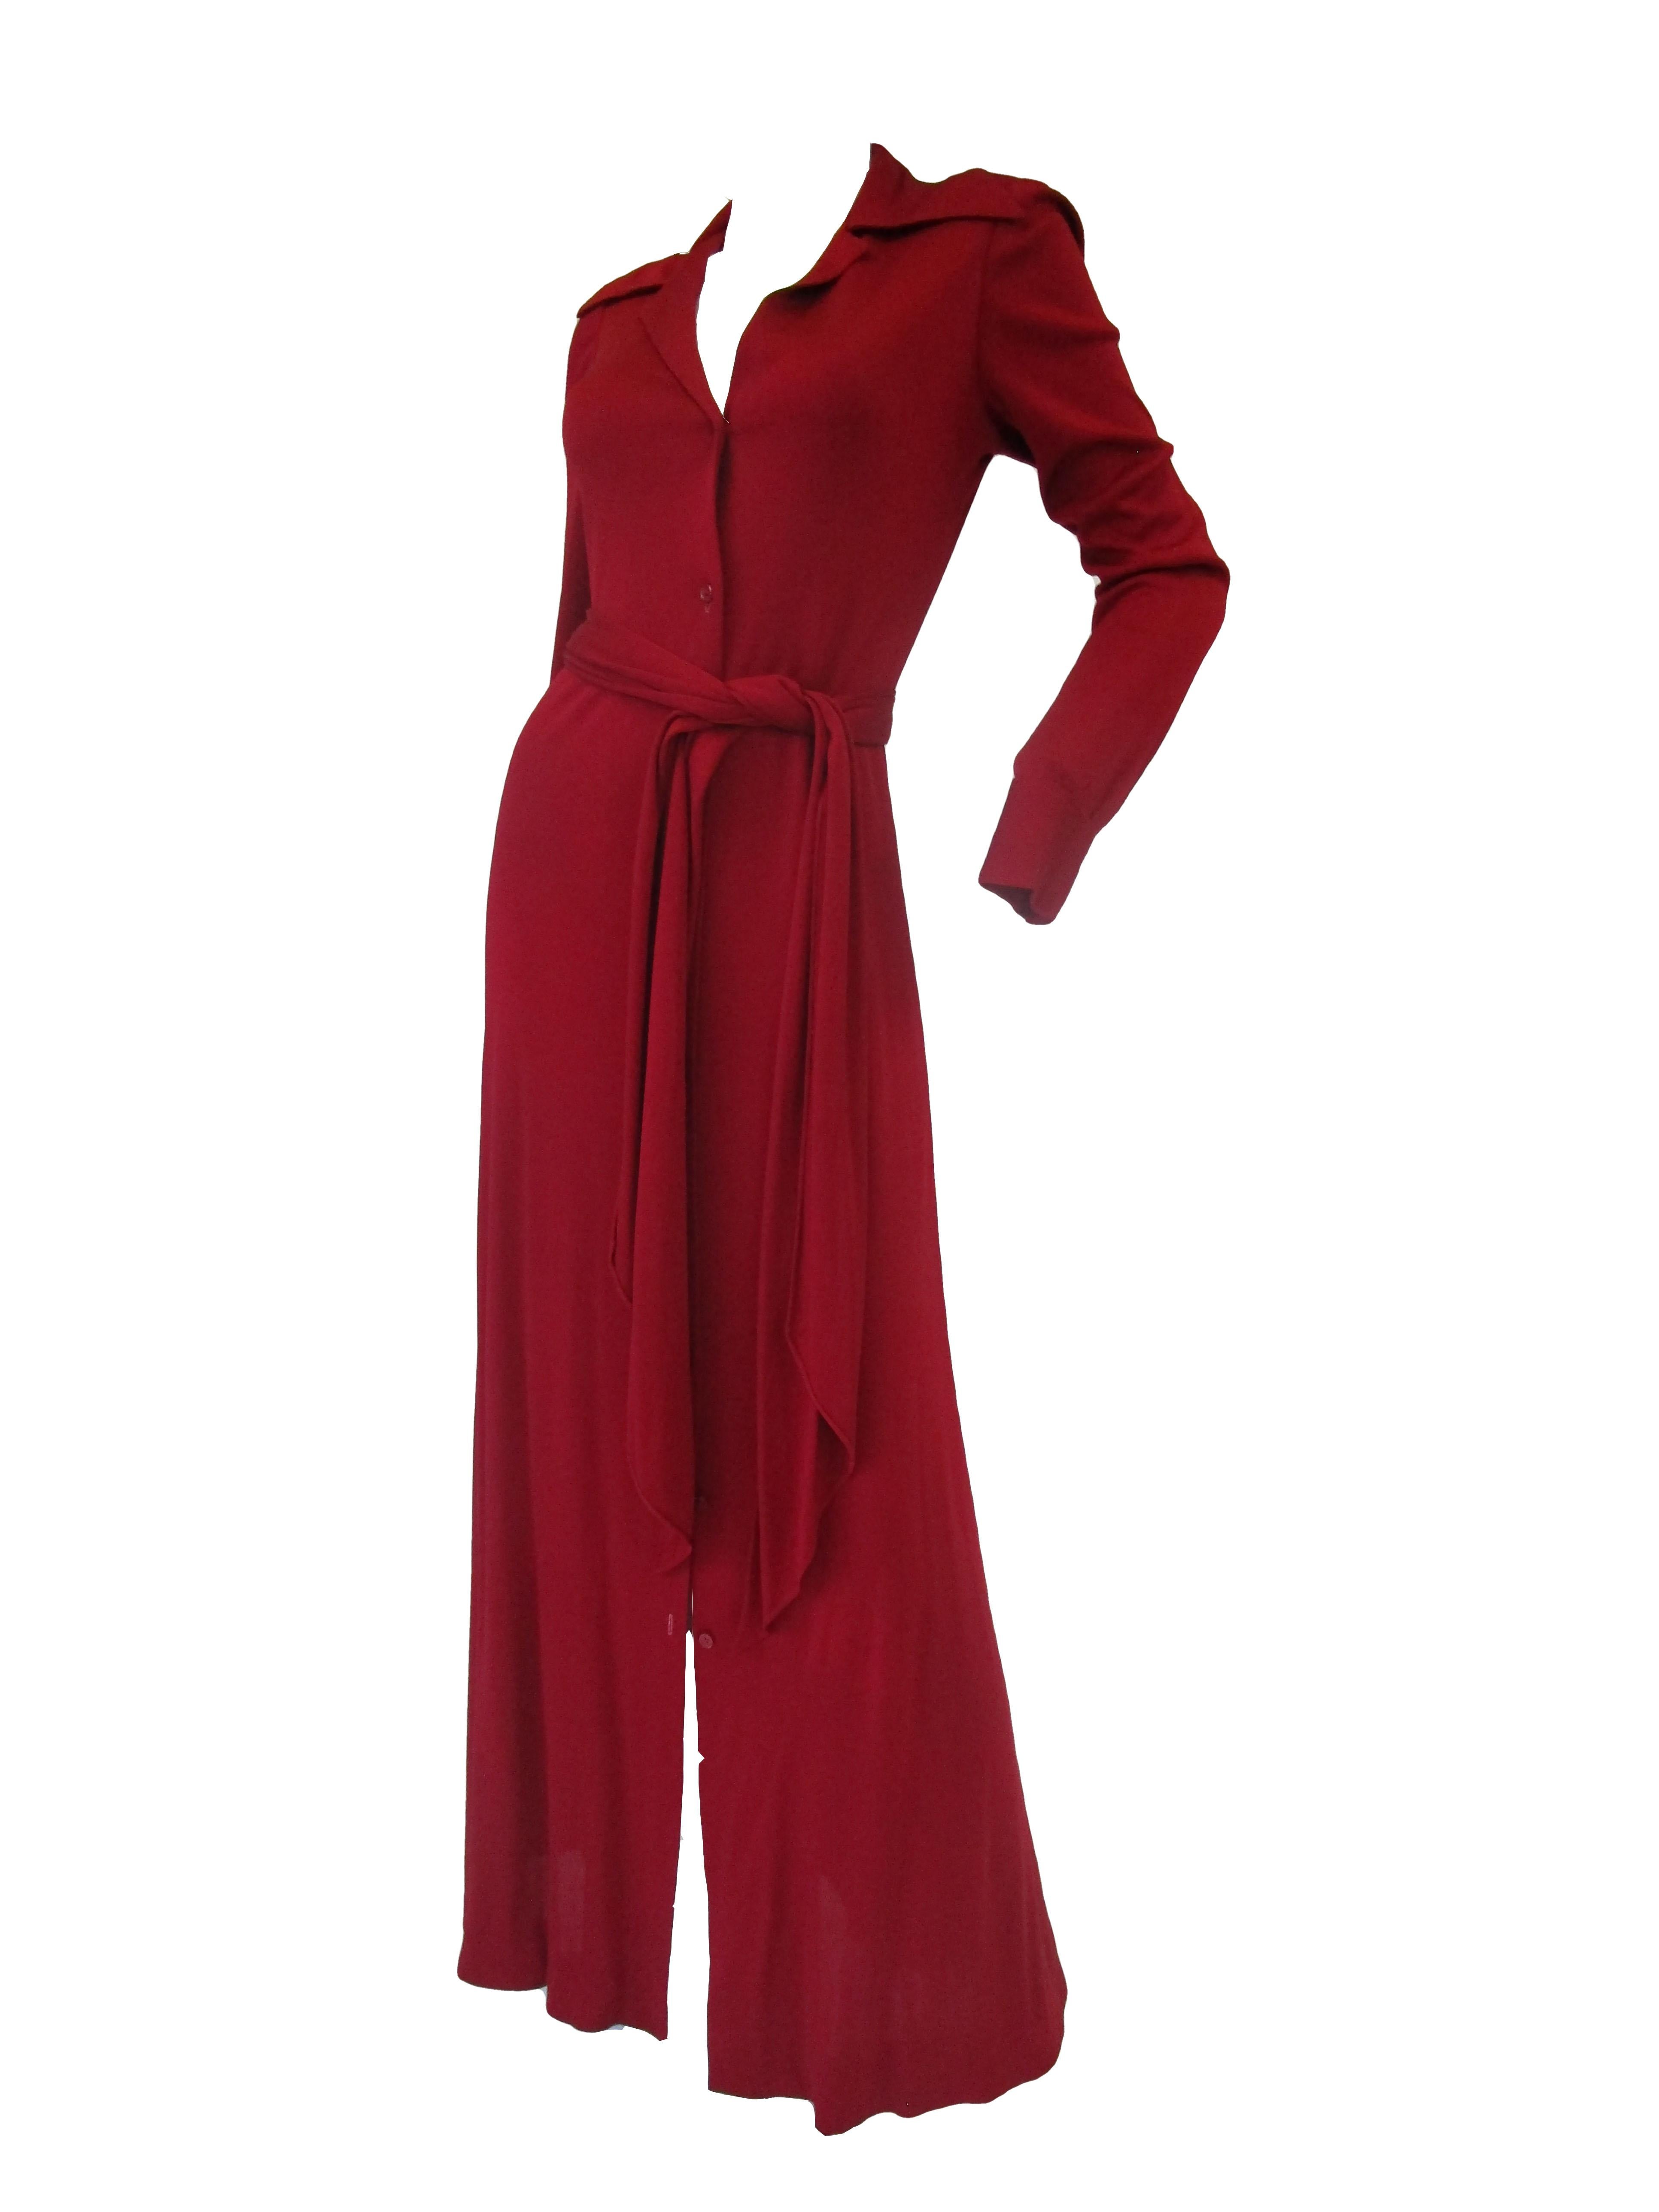 1972 Halston Red Jersey Knit Maxi Dress  For Sale 3